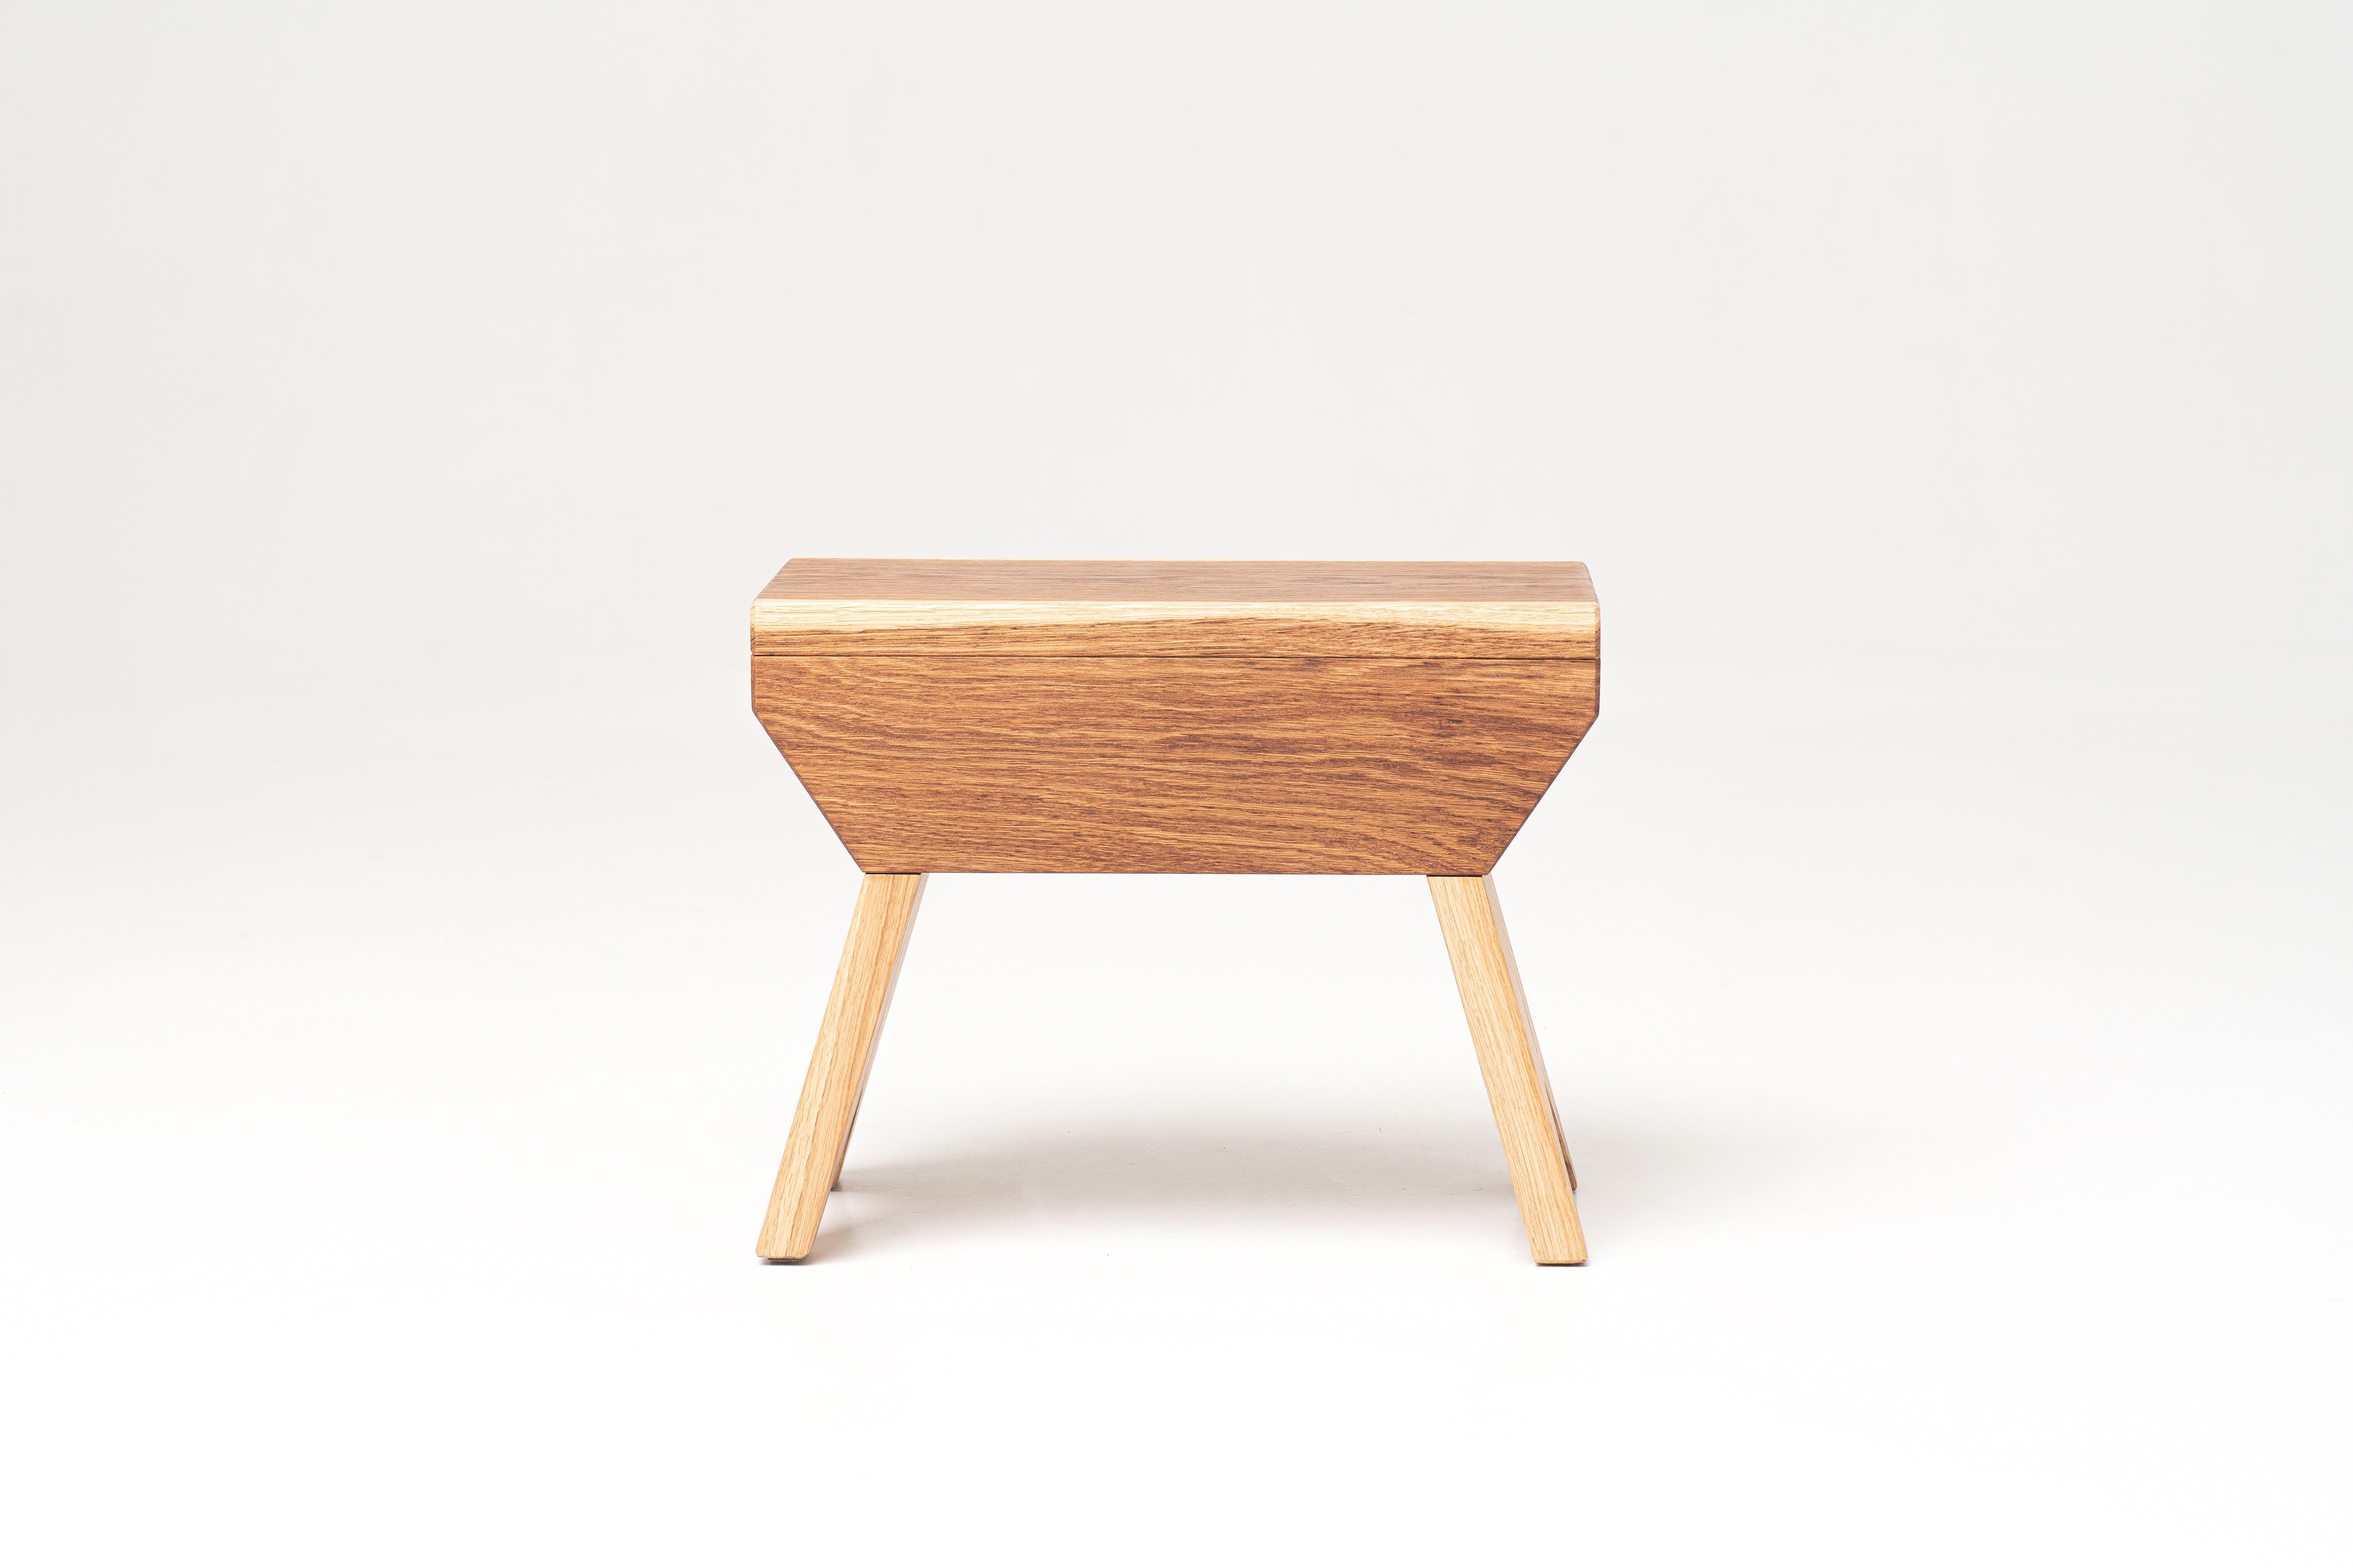 Oslinchik 01 Low Stool by Oito
Dimensions: D21 x W38 x H30 cm
Materials: Oak wood, wax or paint.
Weight: 4 kg
Also Available in different colours.

Wooden stools are a trend for environmental friendliness and home comfort. We try to make our